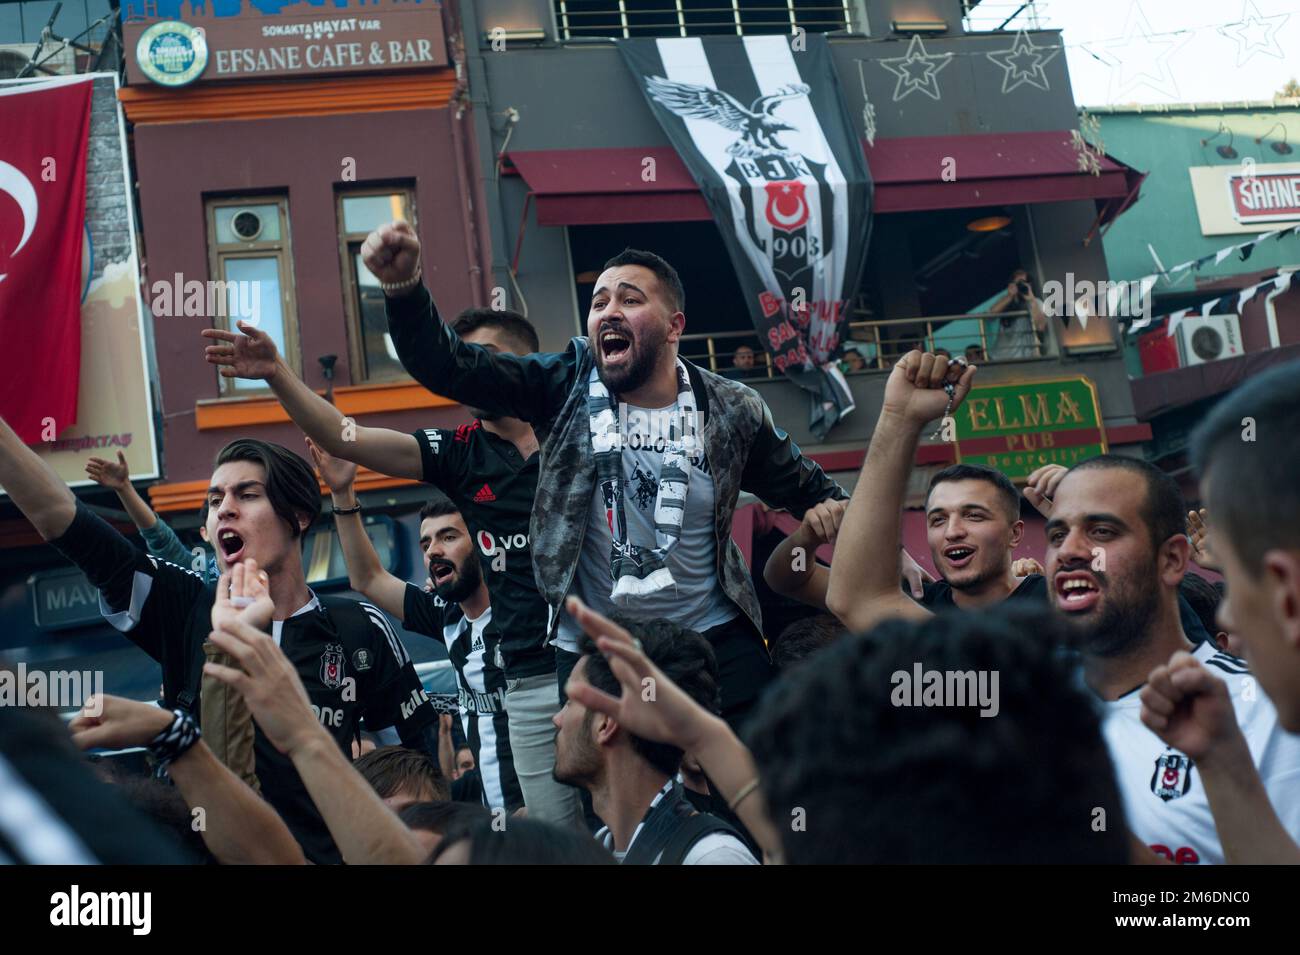 Besiktas Carsi football supporters singing songs before a match in Istanbul, Turkey. Stock Photo